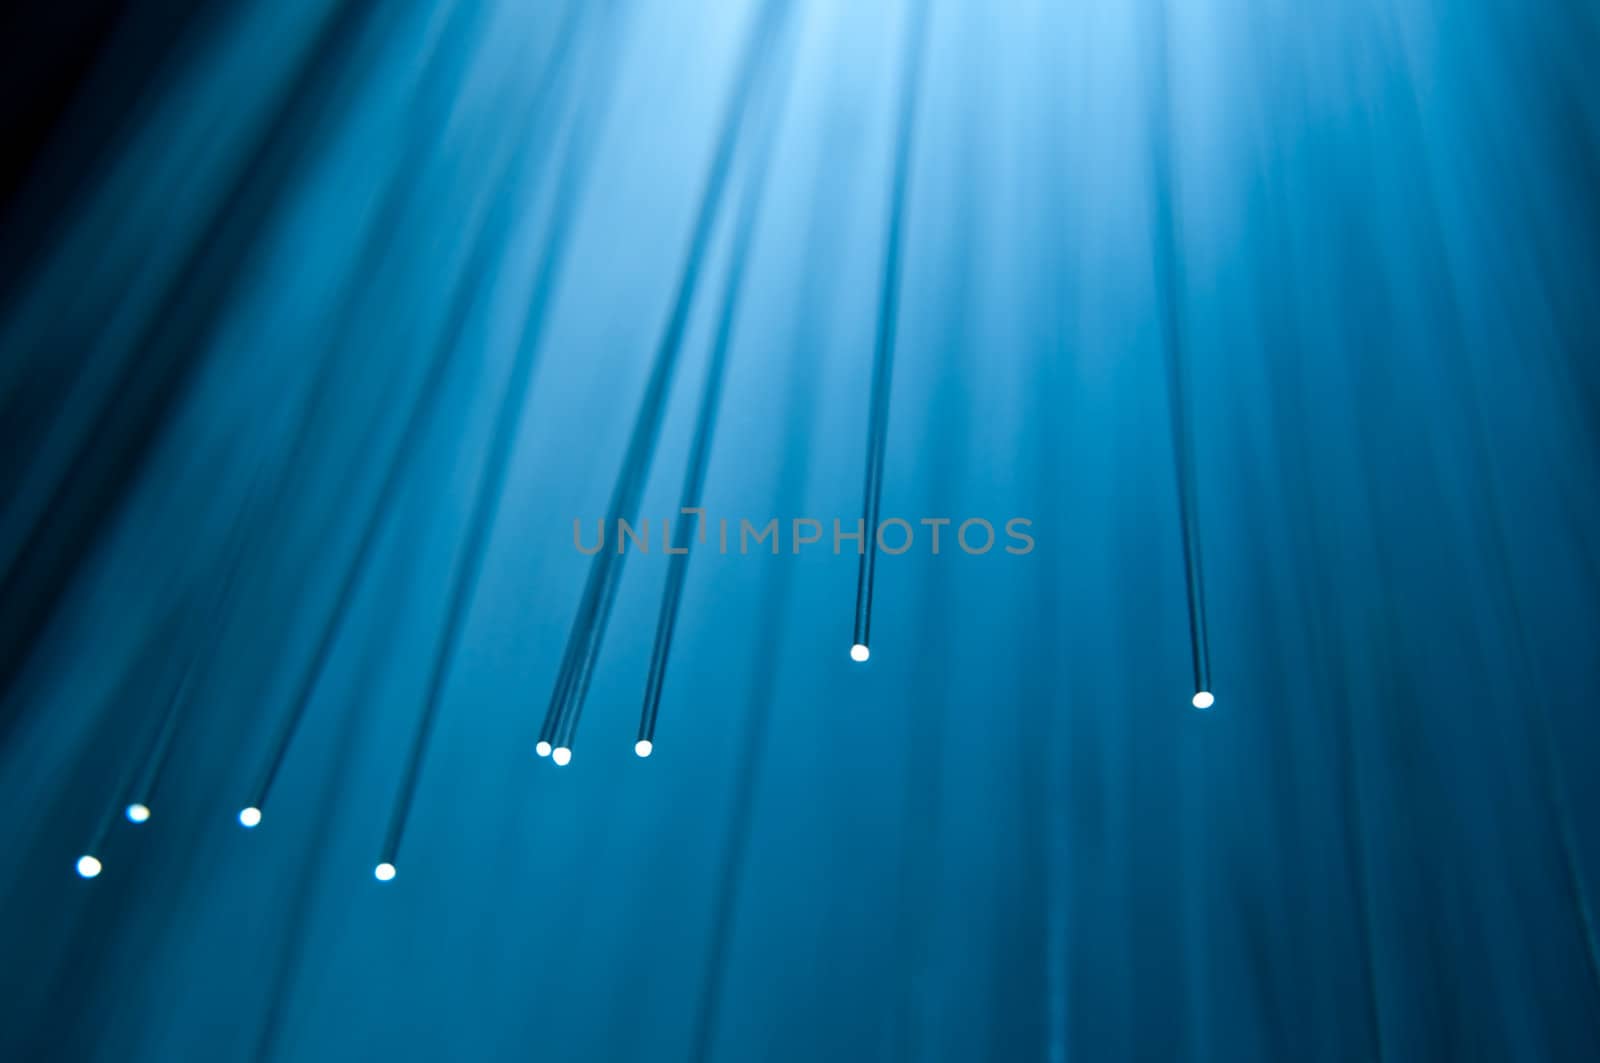 Close up capturing the ends of several illuminated fibre optic light strands against a vibrant blue background.